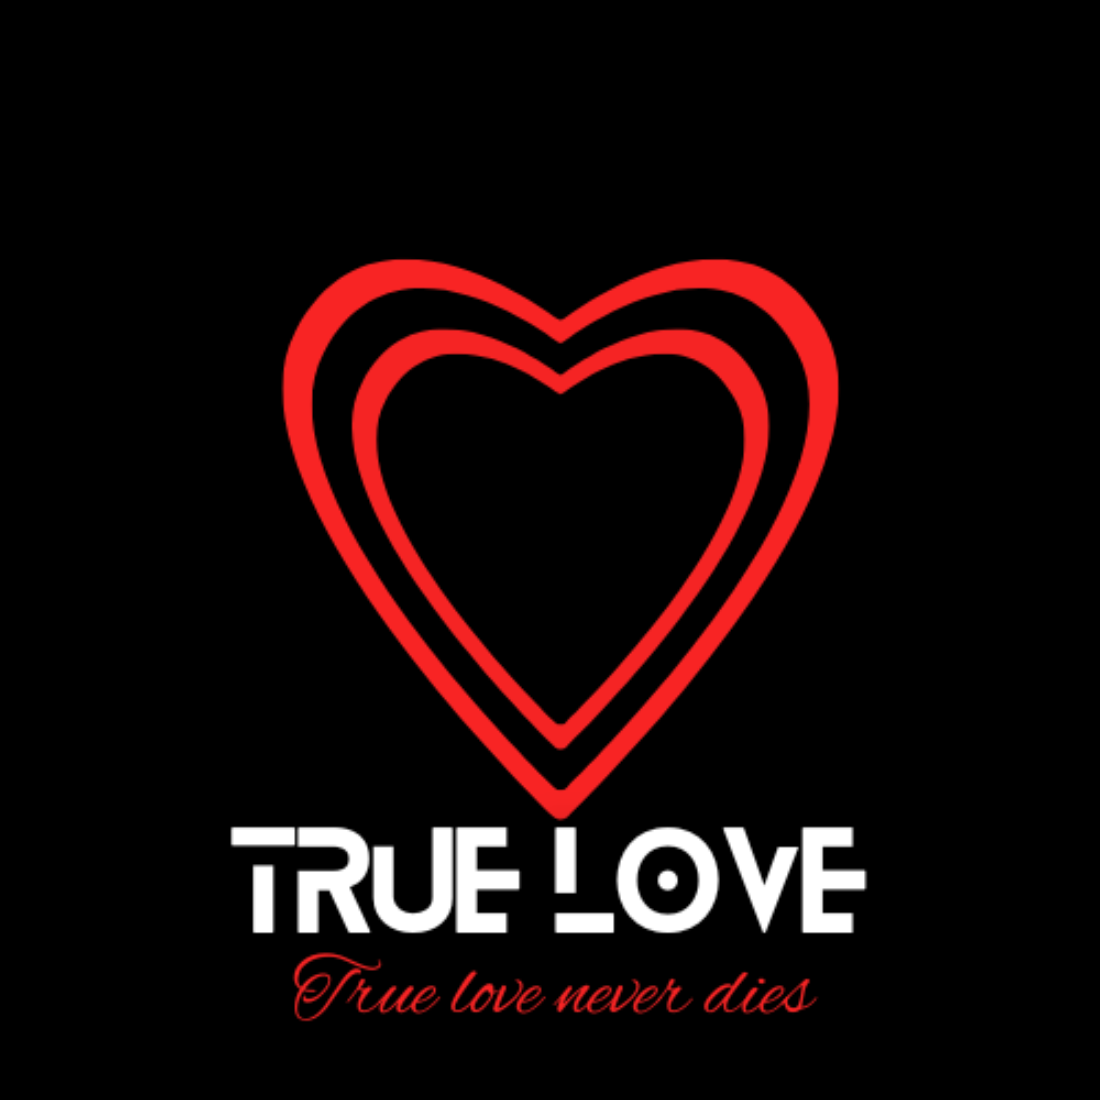 HEART-TRUE LOVE preview image.